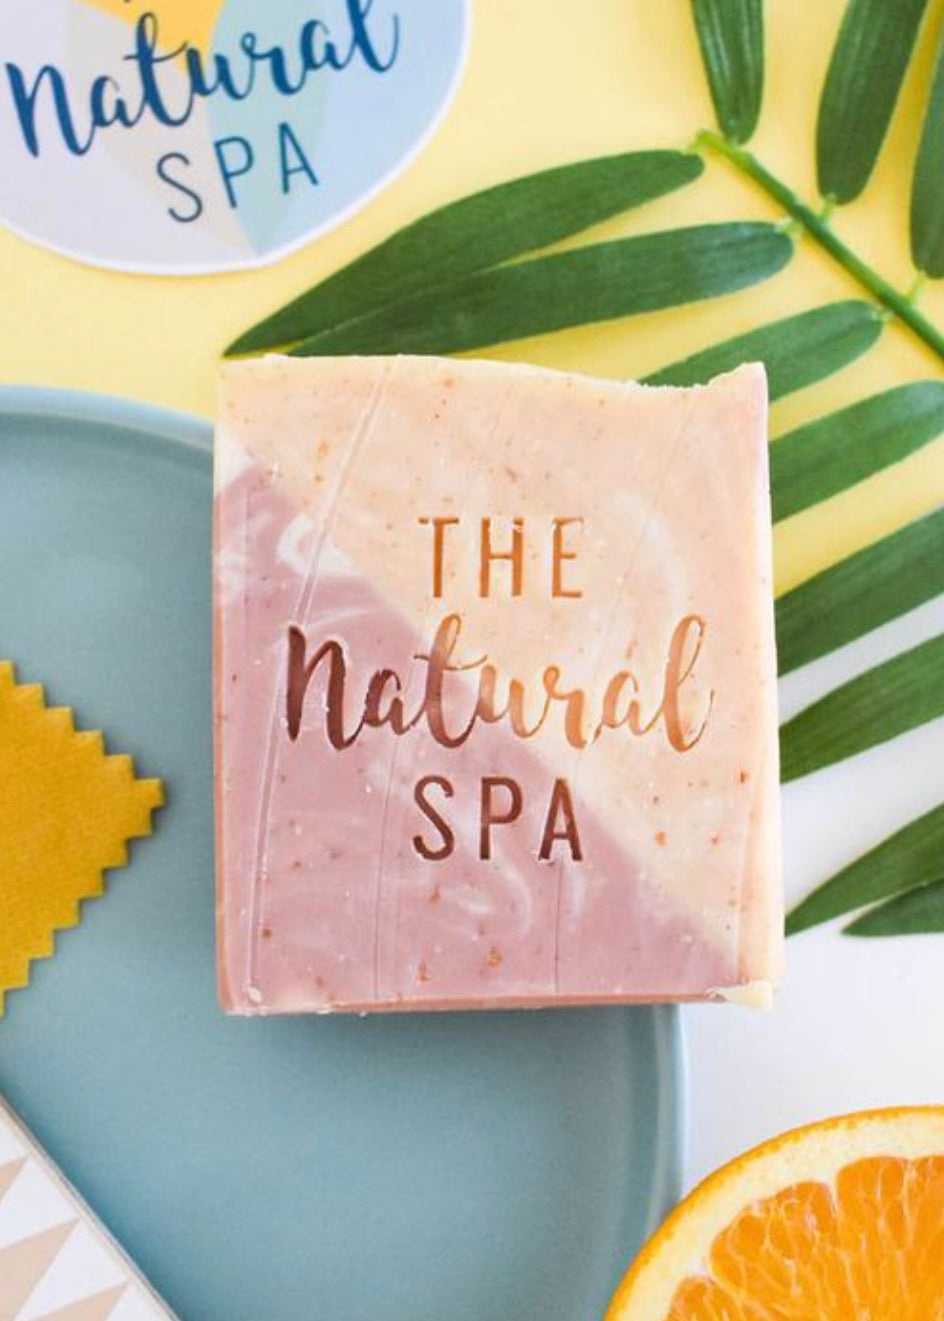 The Natural Spa - Cold Process Soap - Large - Citrus Blossom